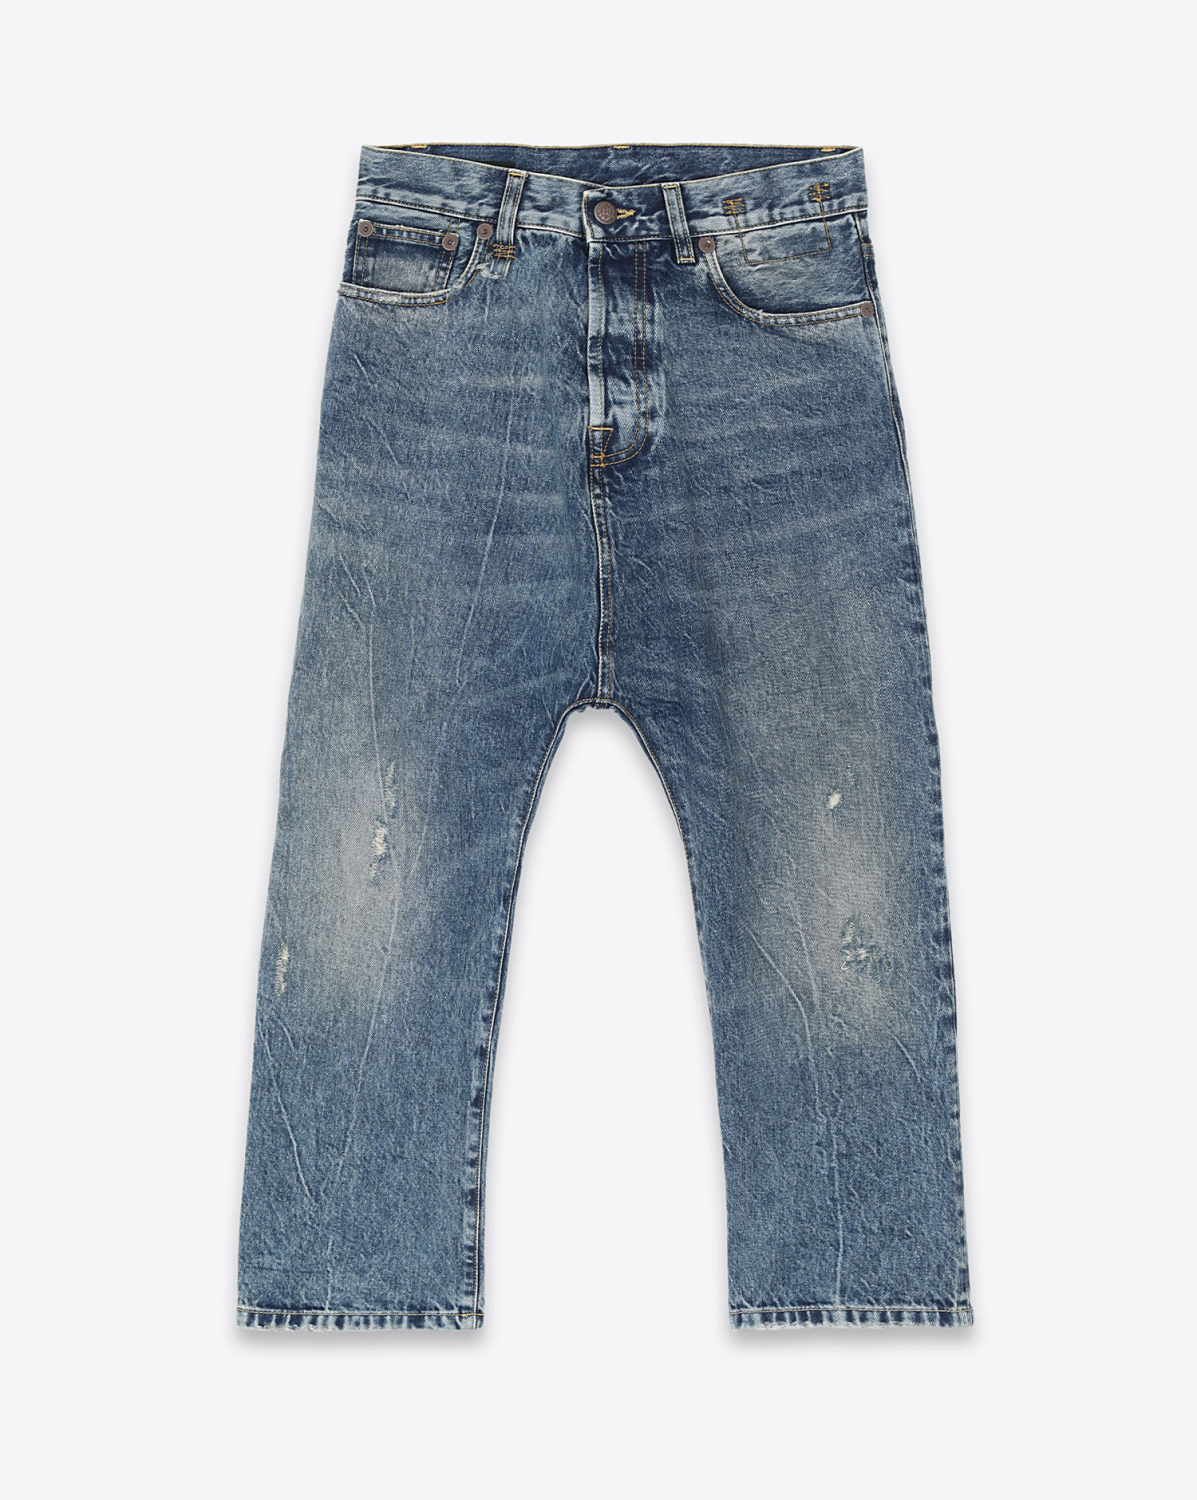 Jeans R13 Denim Collection Tailored Drop - Kelly